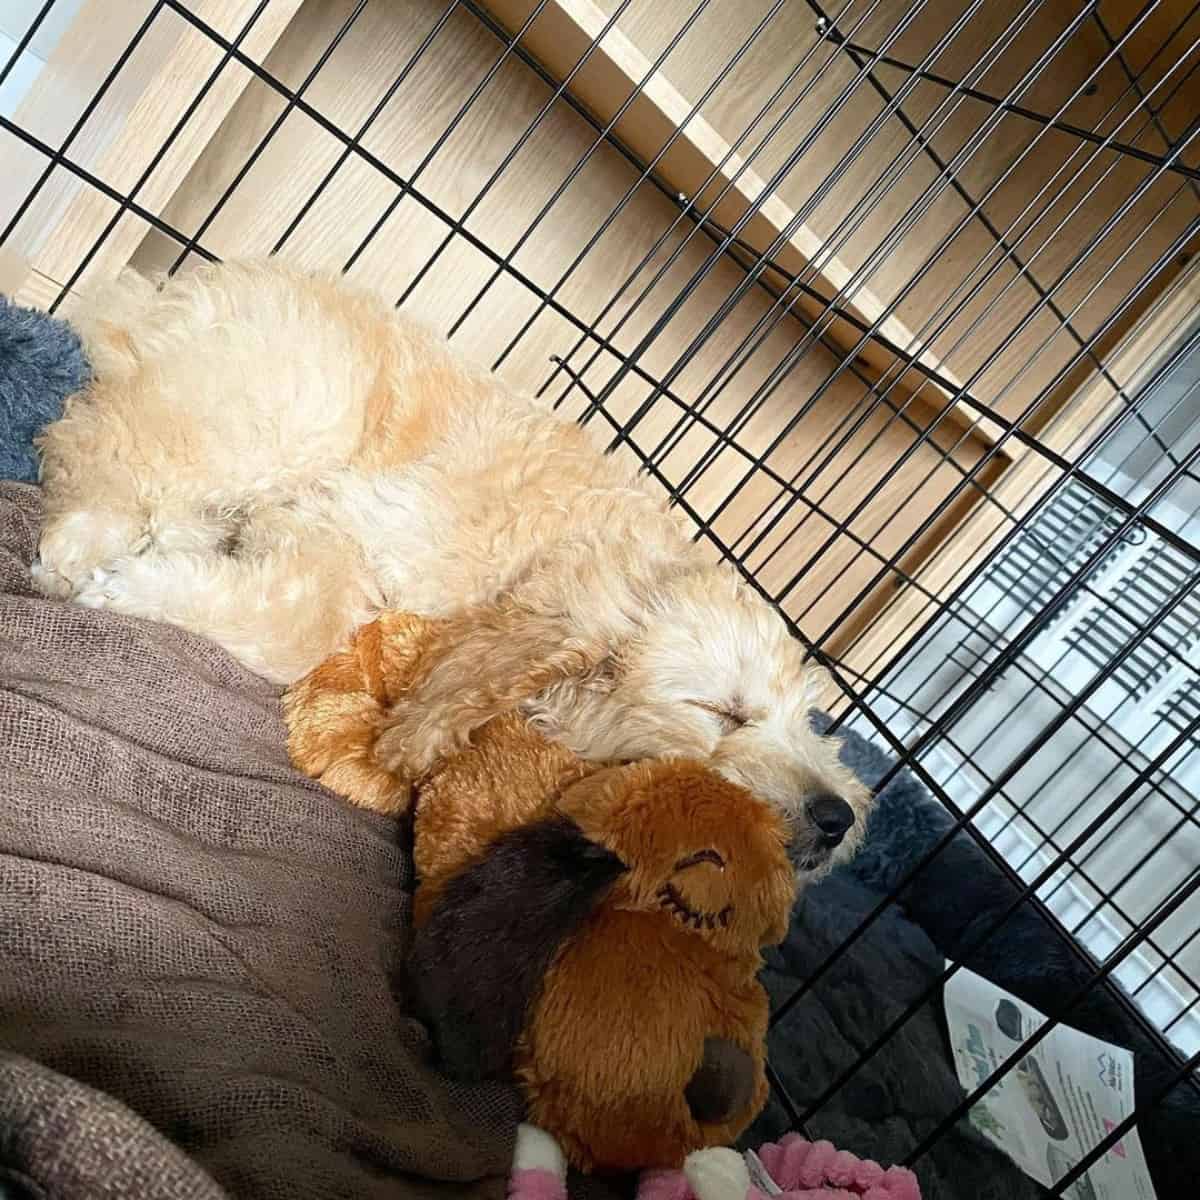 Goldendoodle comfortably sleeping with his toy